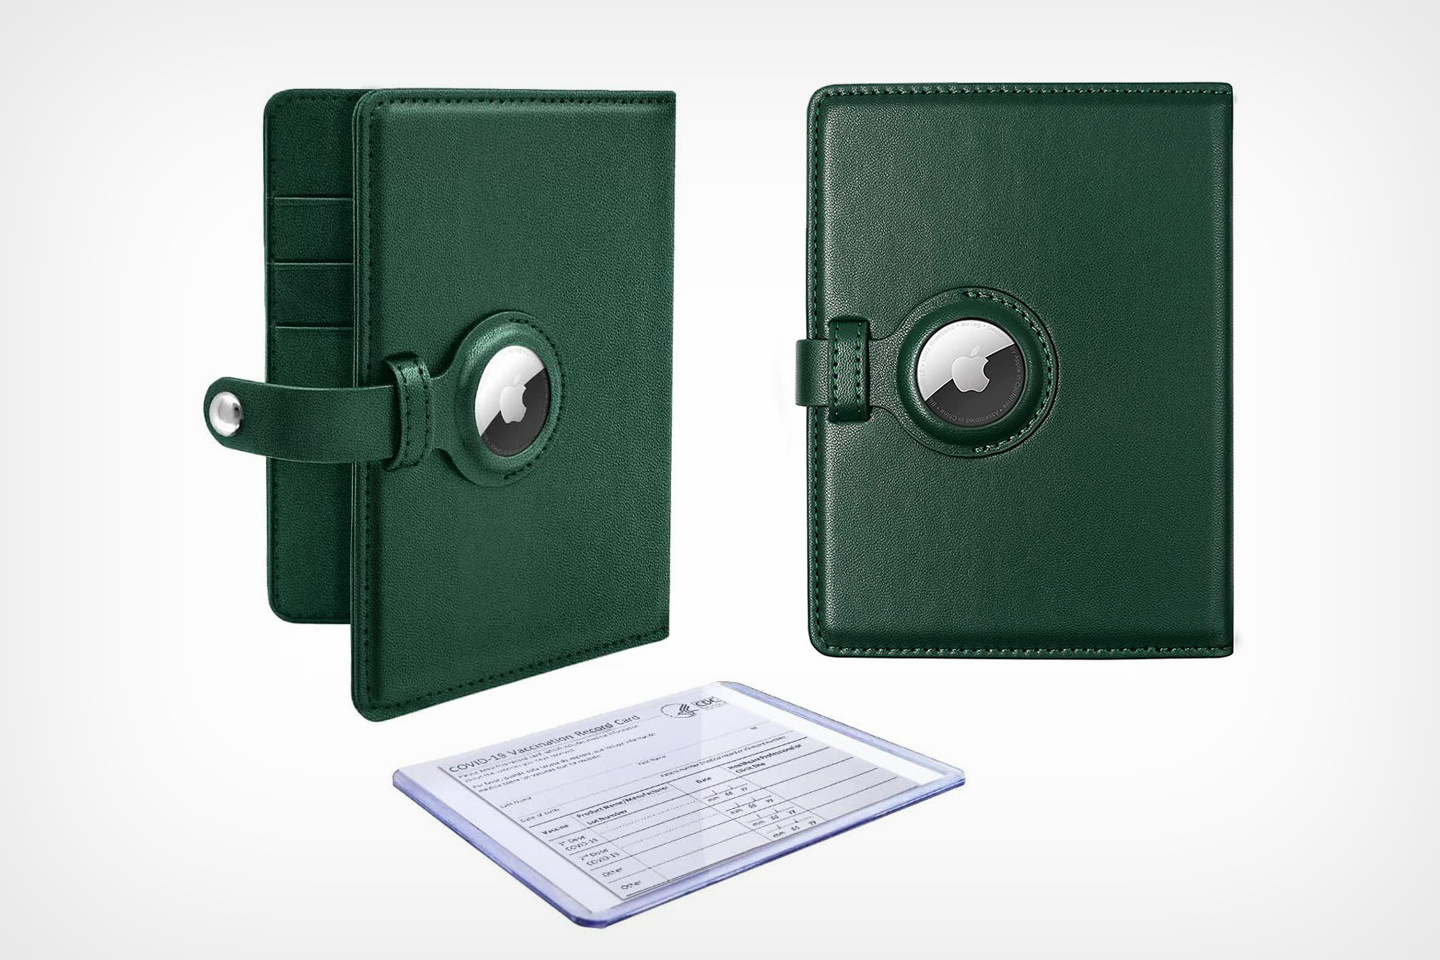 #AirTag-equipped Passport Wallet lets you keep track of your cash and important documents